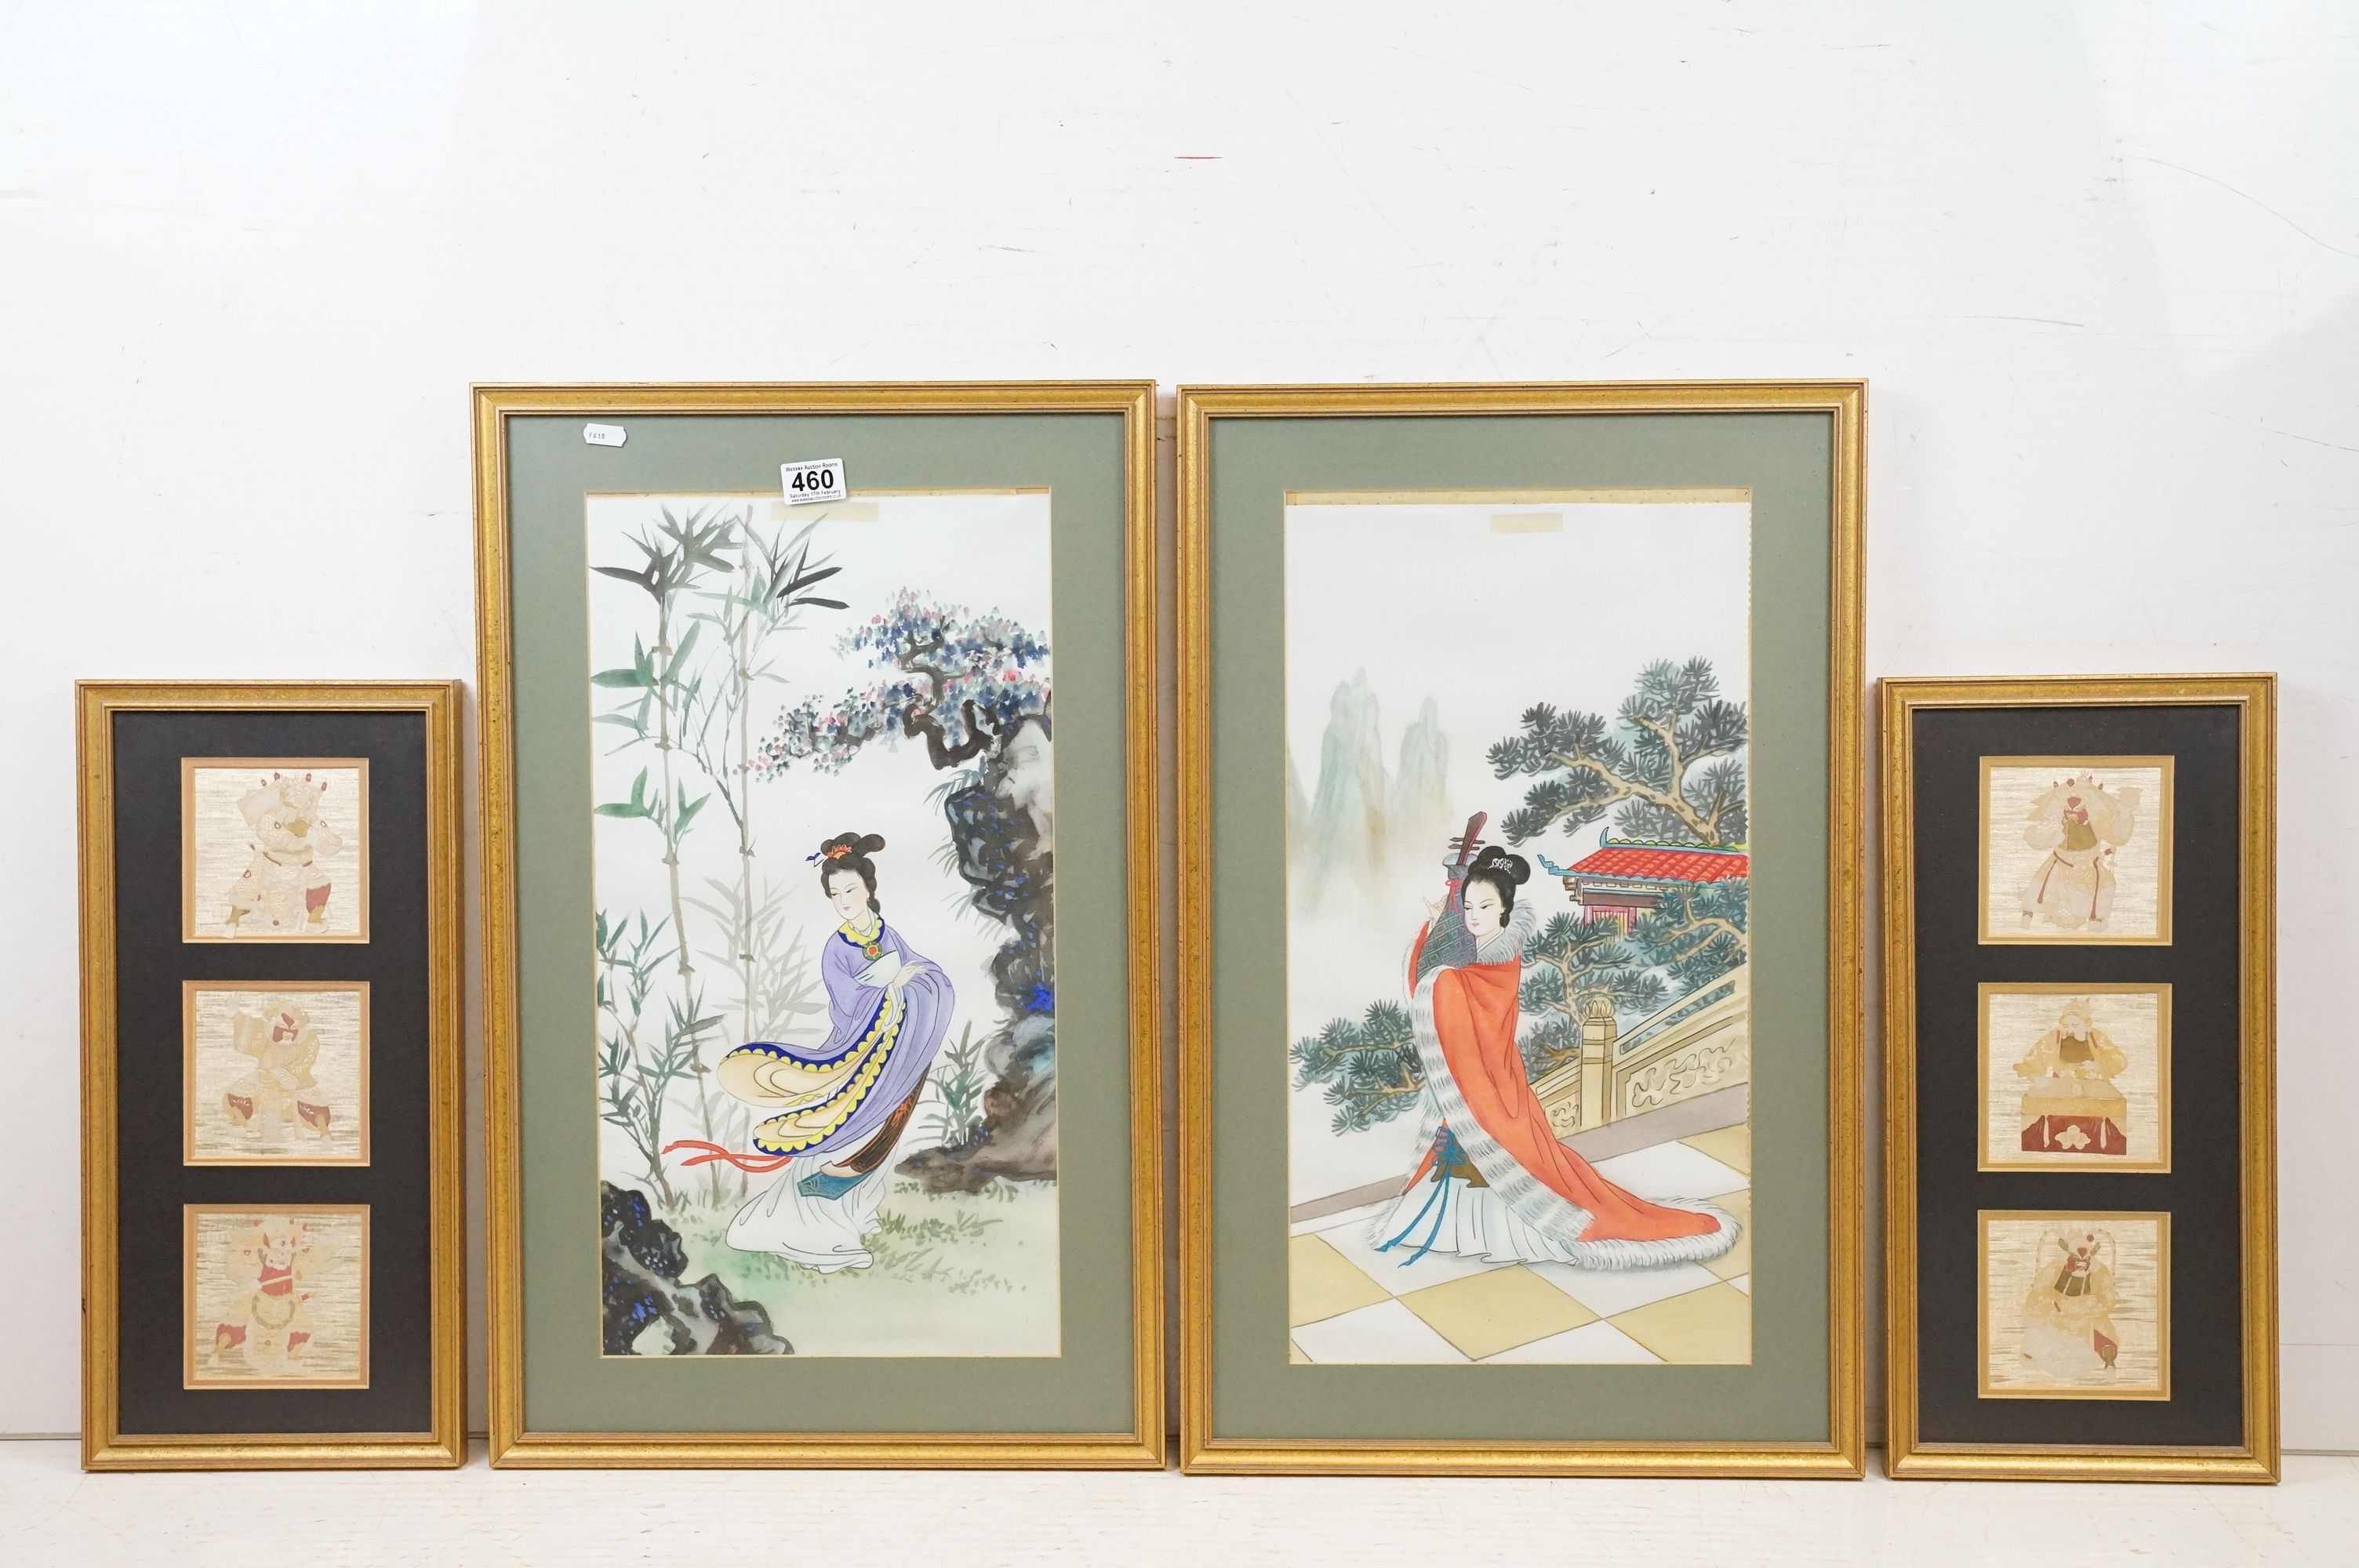 Pair of 20th Century Chinese water colour paintings on silk together with a pair of wood block